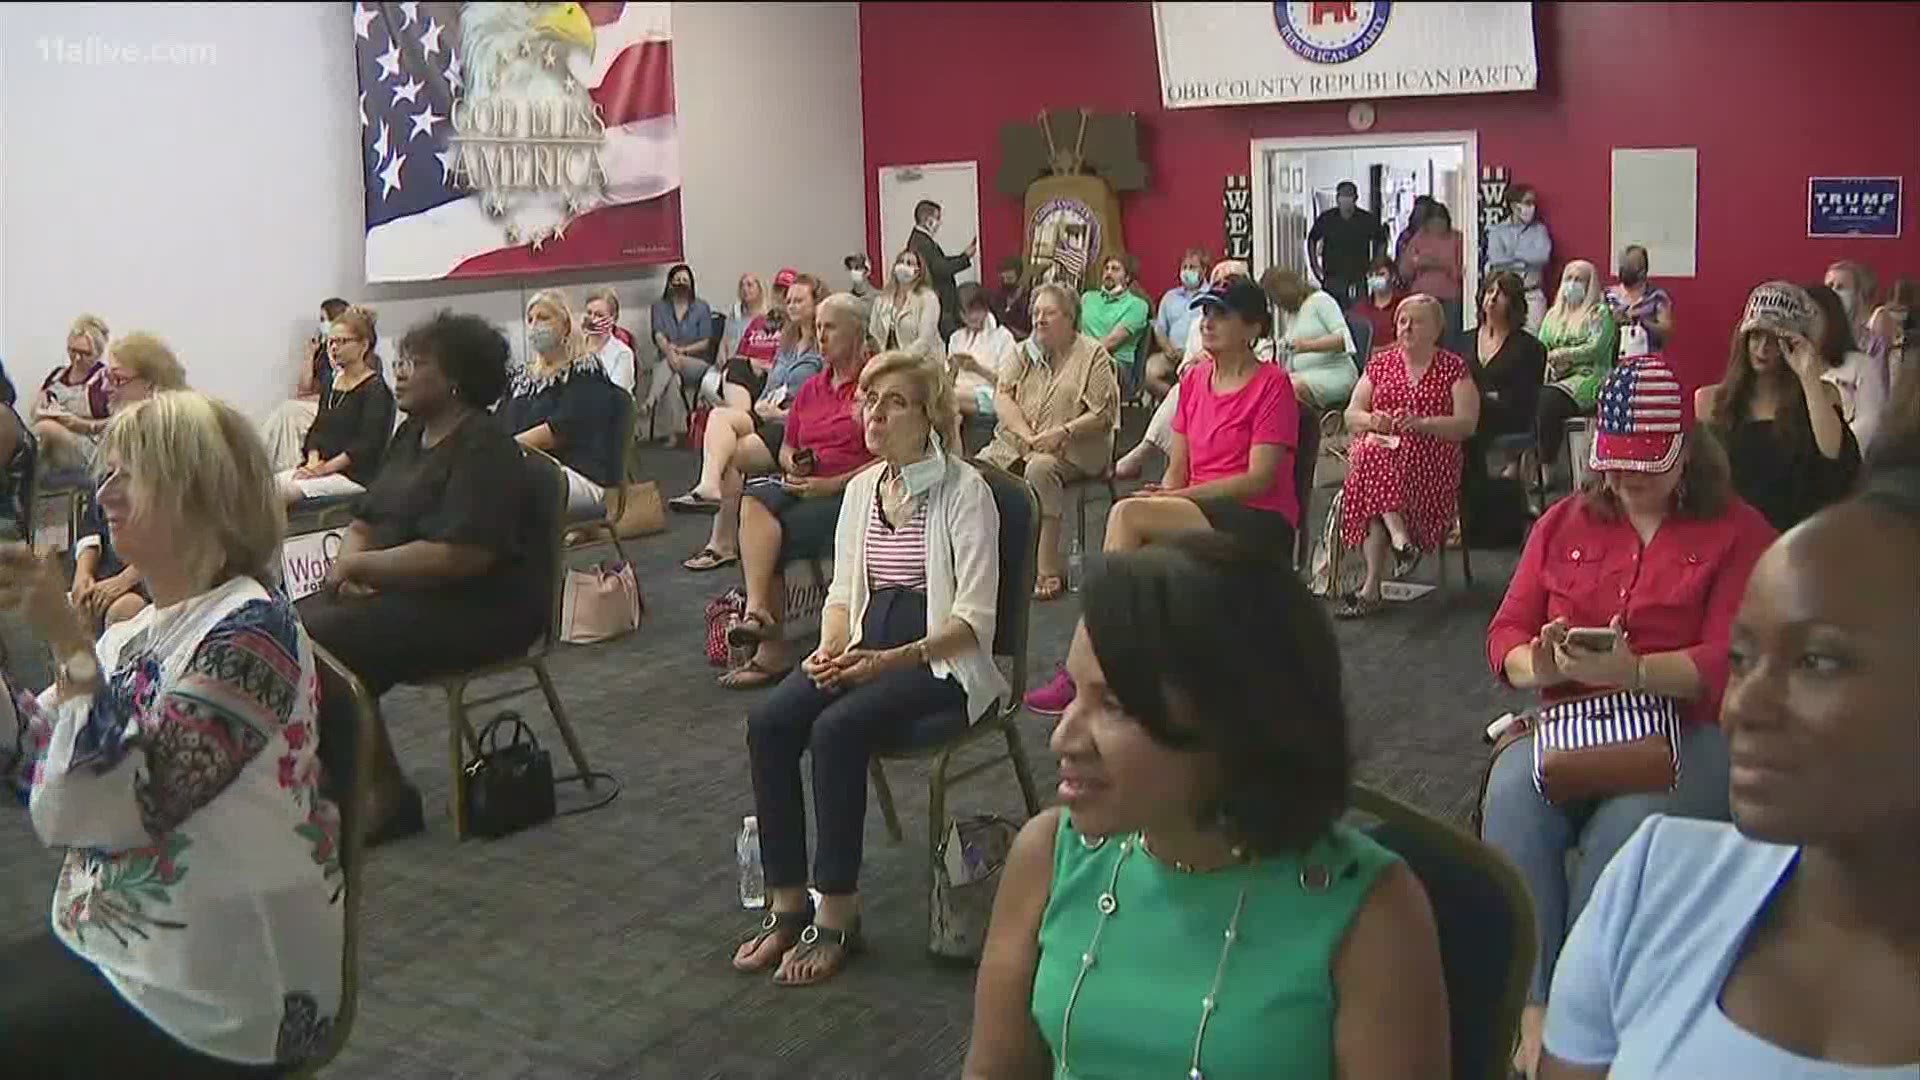 A group of women supporting President Trump’s campaign came together to celebrate the role women have played in politics